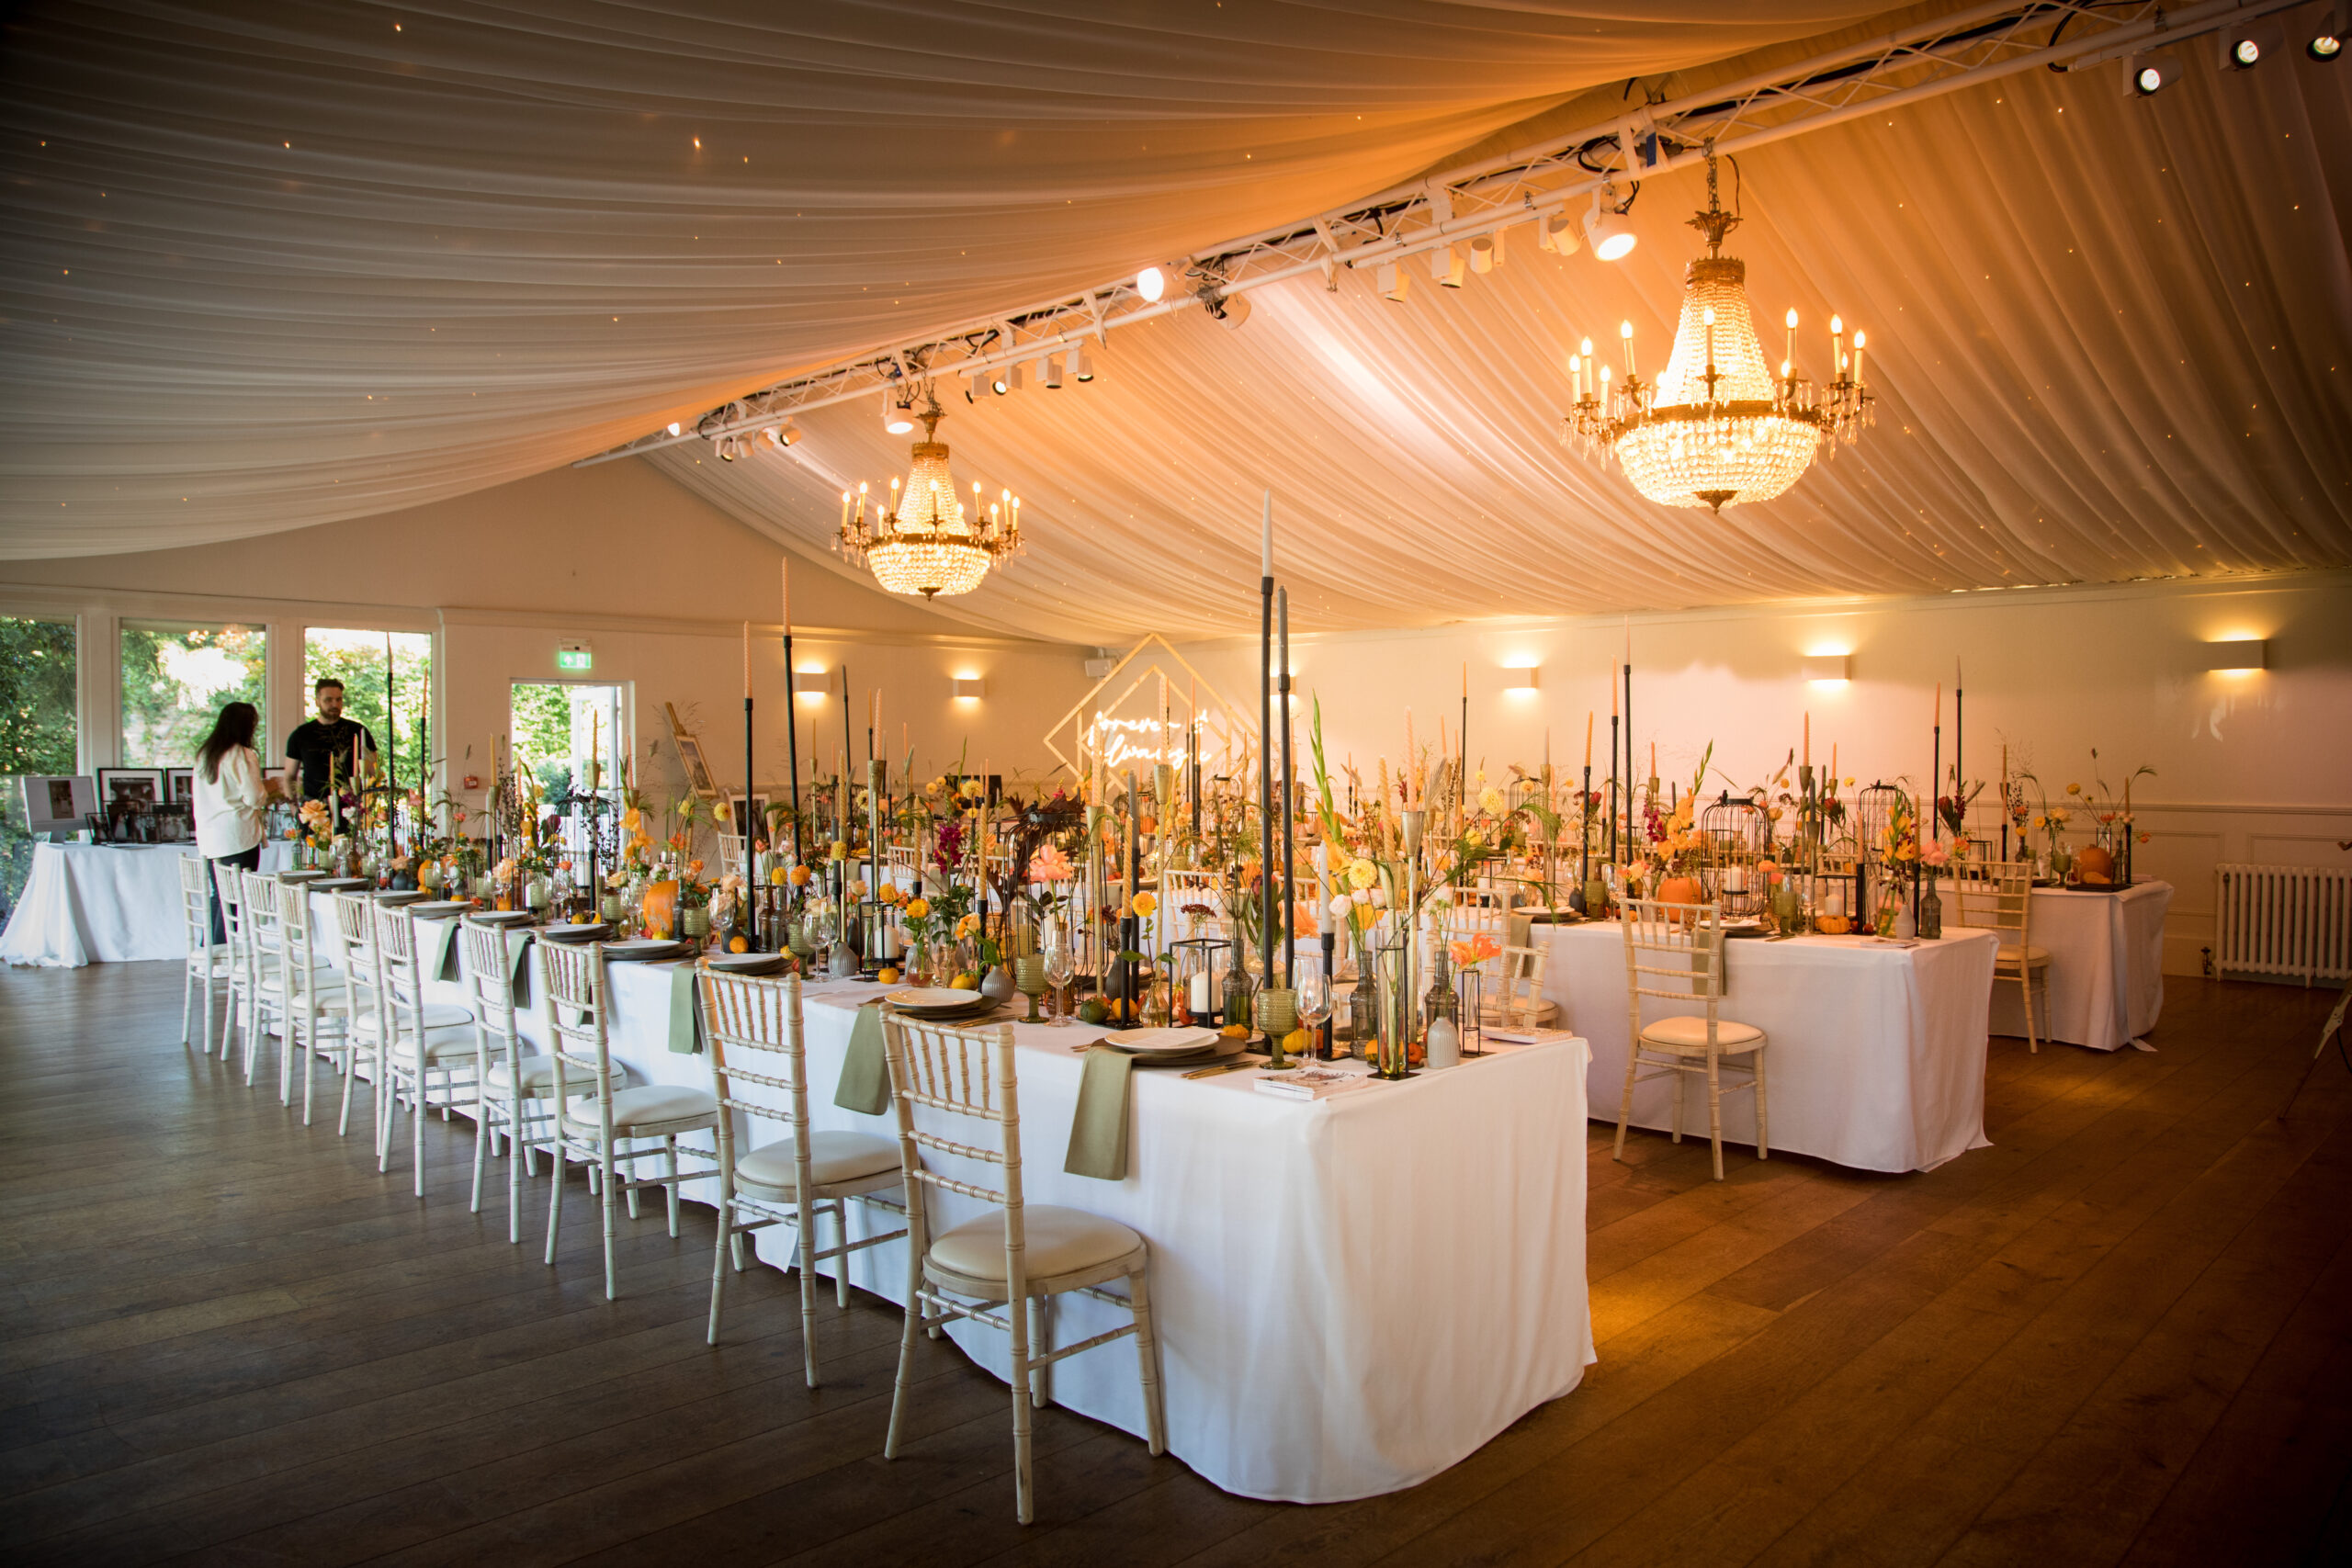 The Marquee at luxury wedding venue Iscoyd Park photographed by Helen Baly